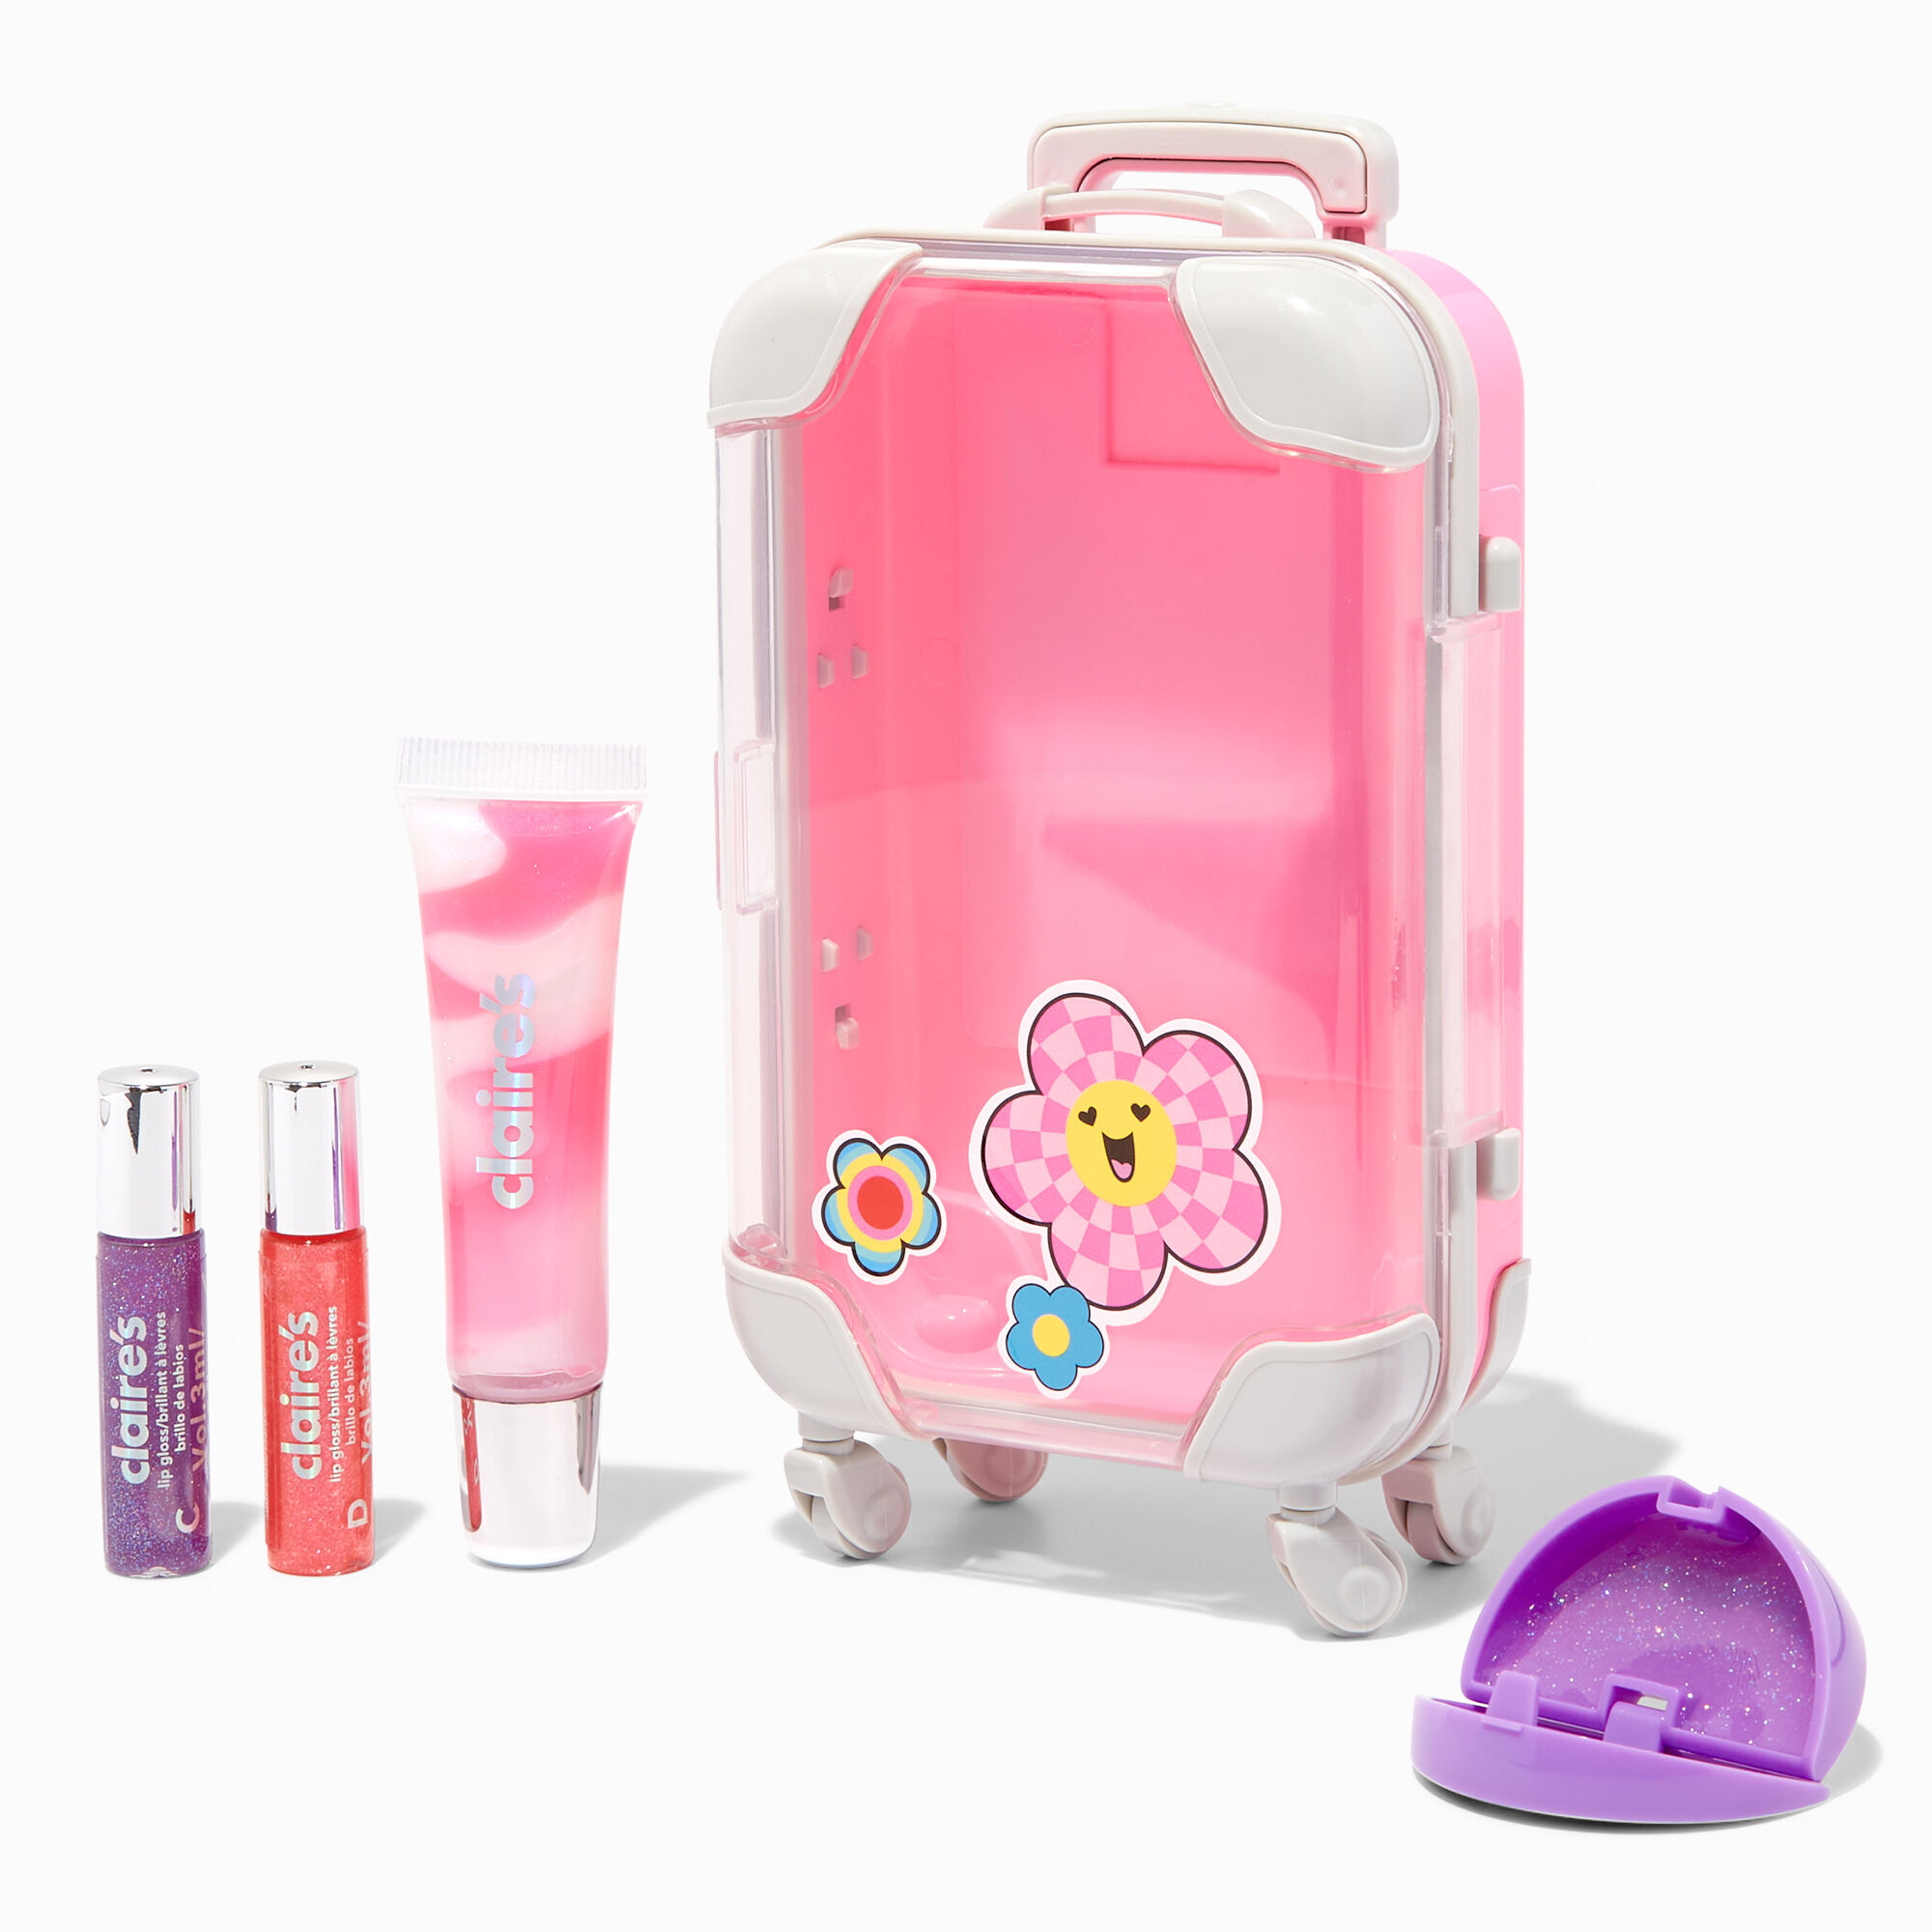 View Claires Checkered Daisy Luggage Lip Gloss Set information